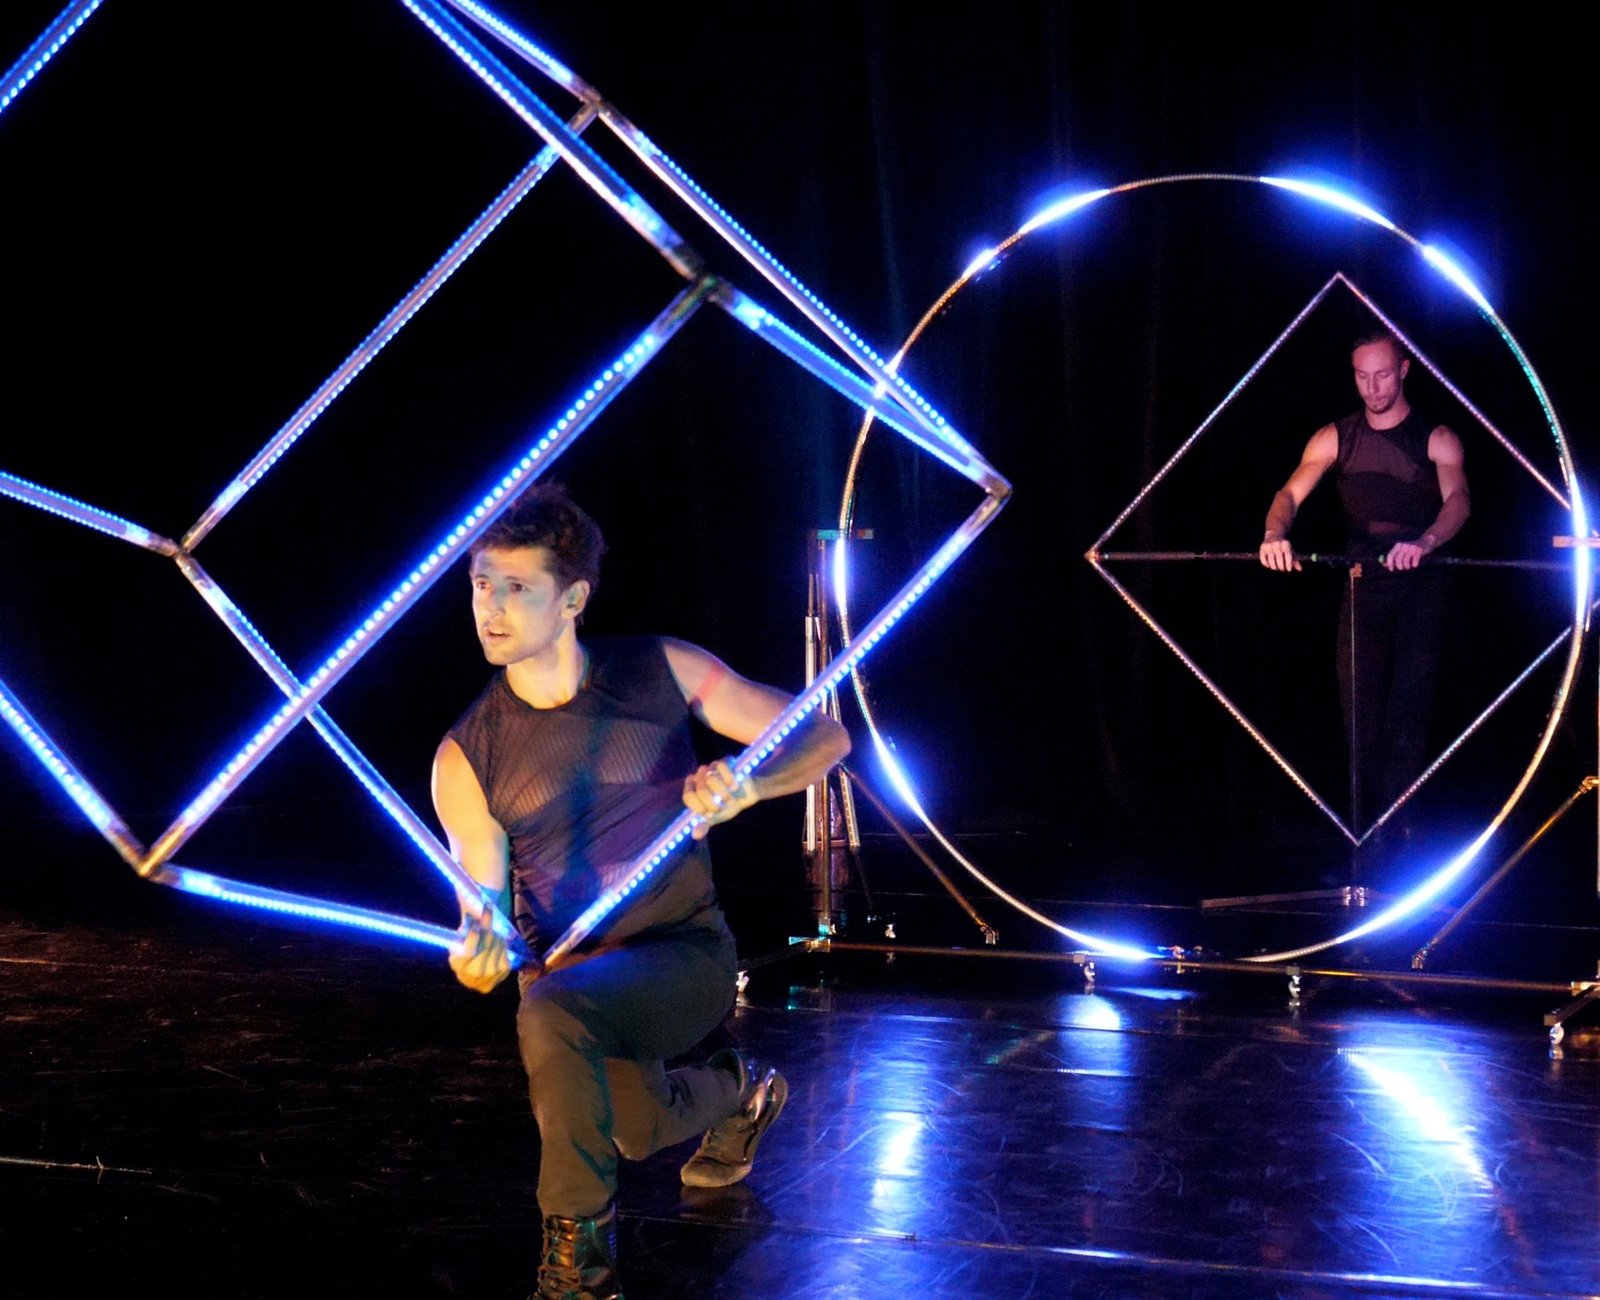 LED juggling show Echo with LED performers Srikanta & Vojta by the company Fusion Arts in France